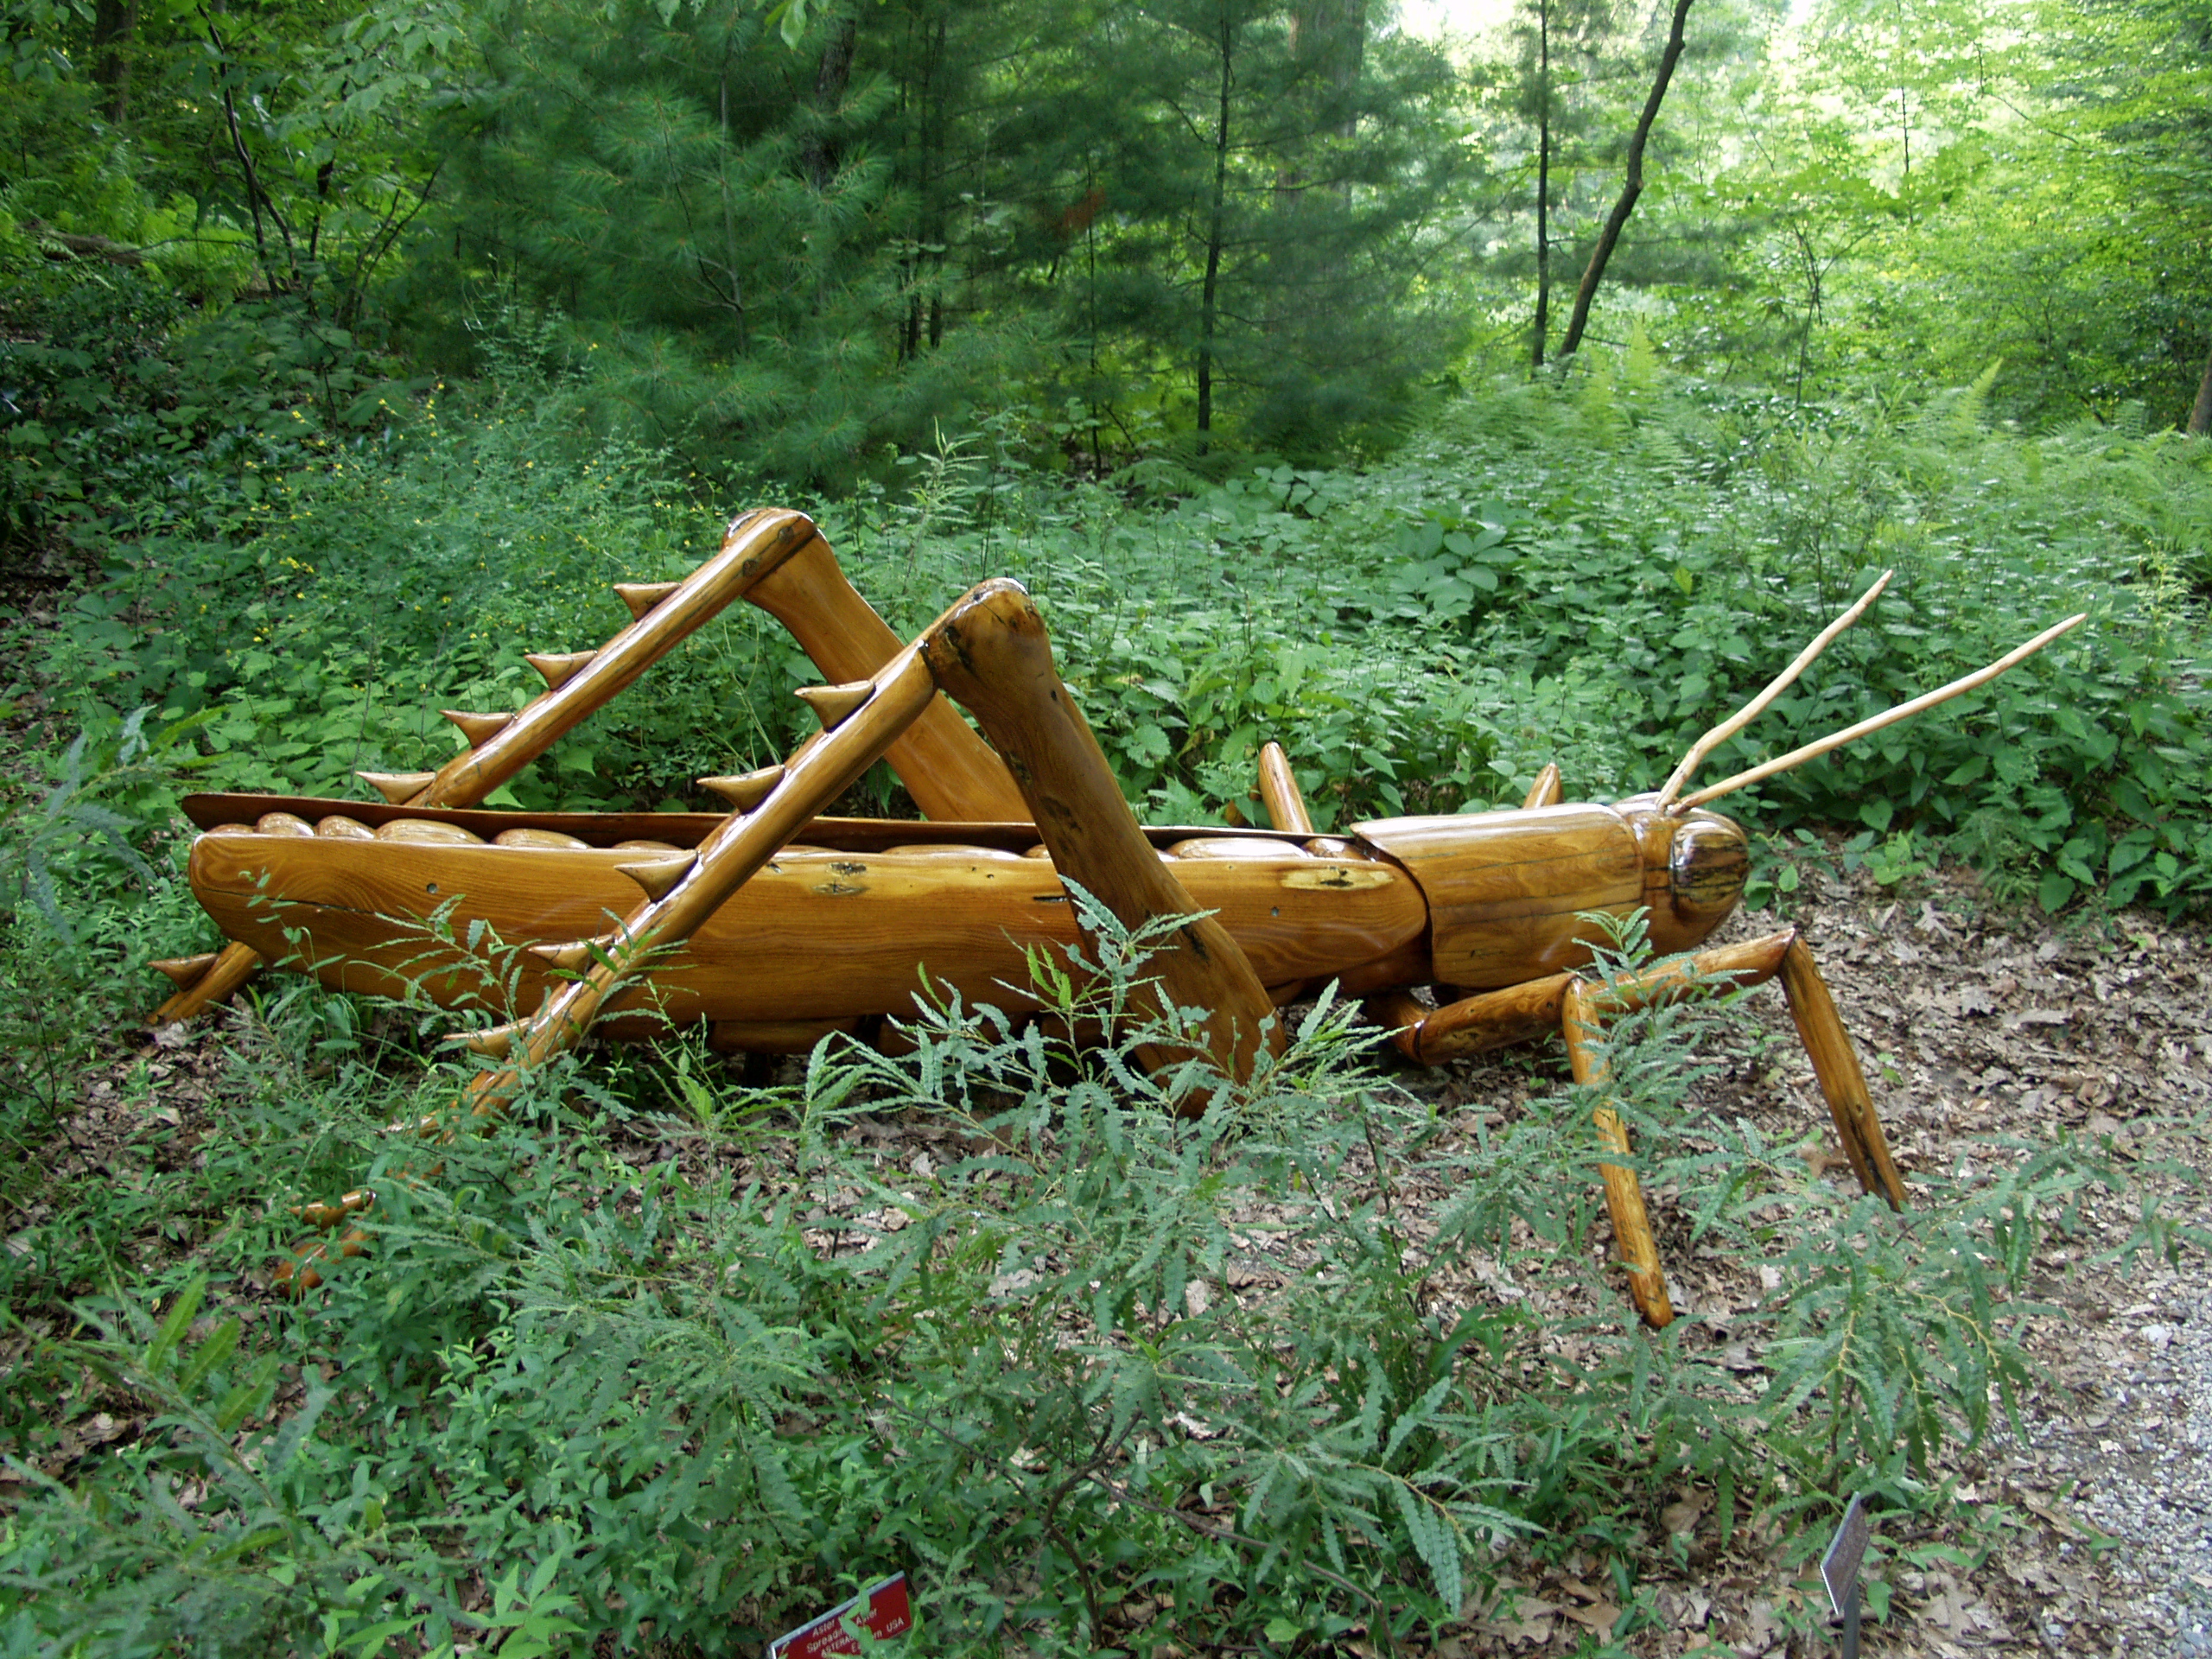 Get Ready to Explore The Dawes Arboretum and David Rogers’ “Big Bugs” Exhibit!